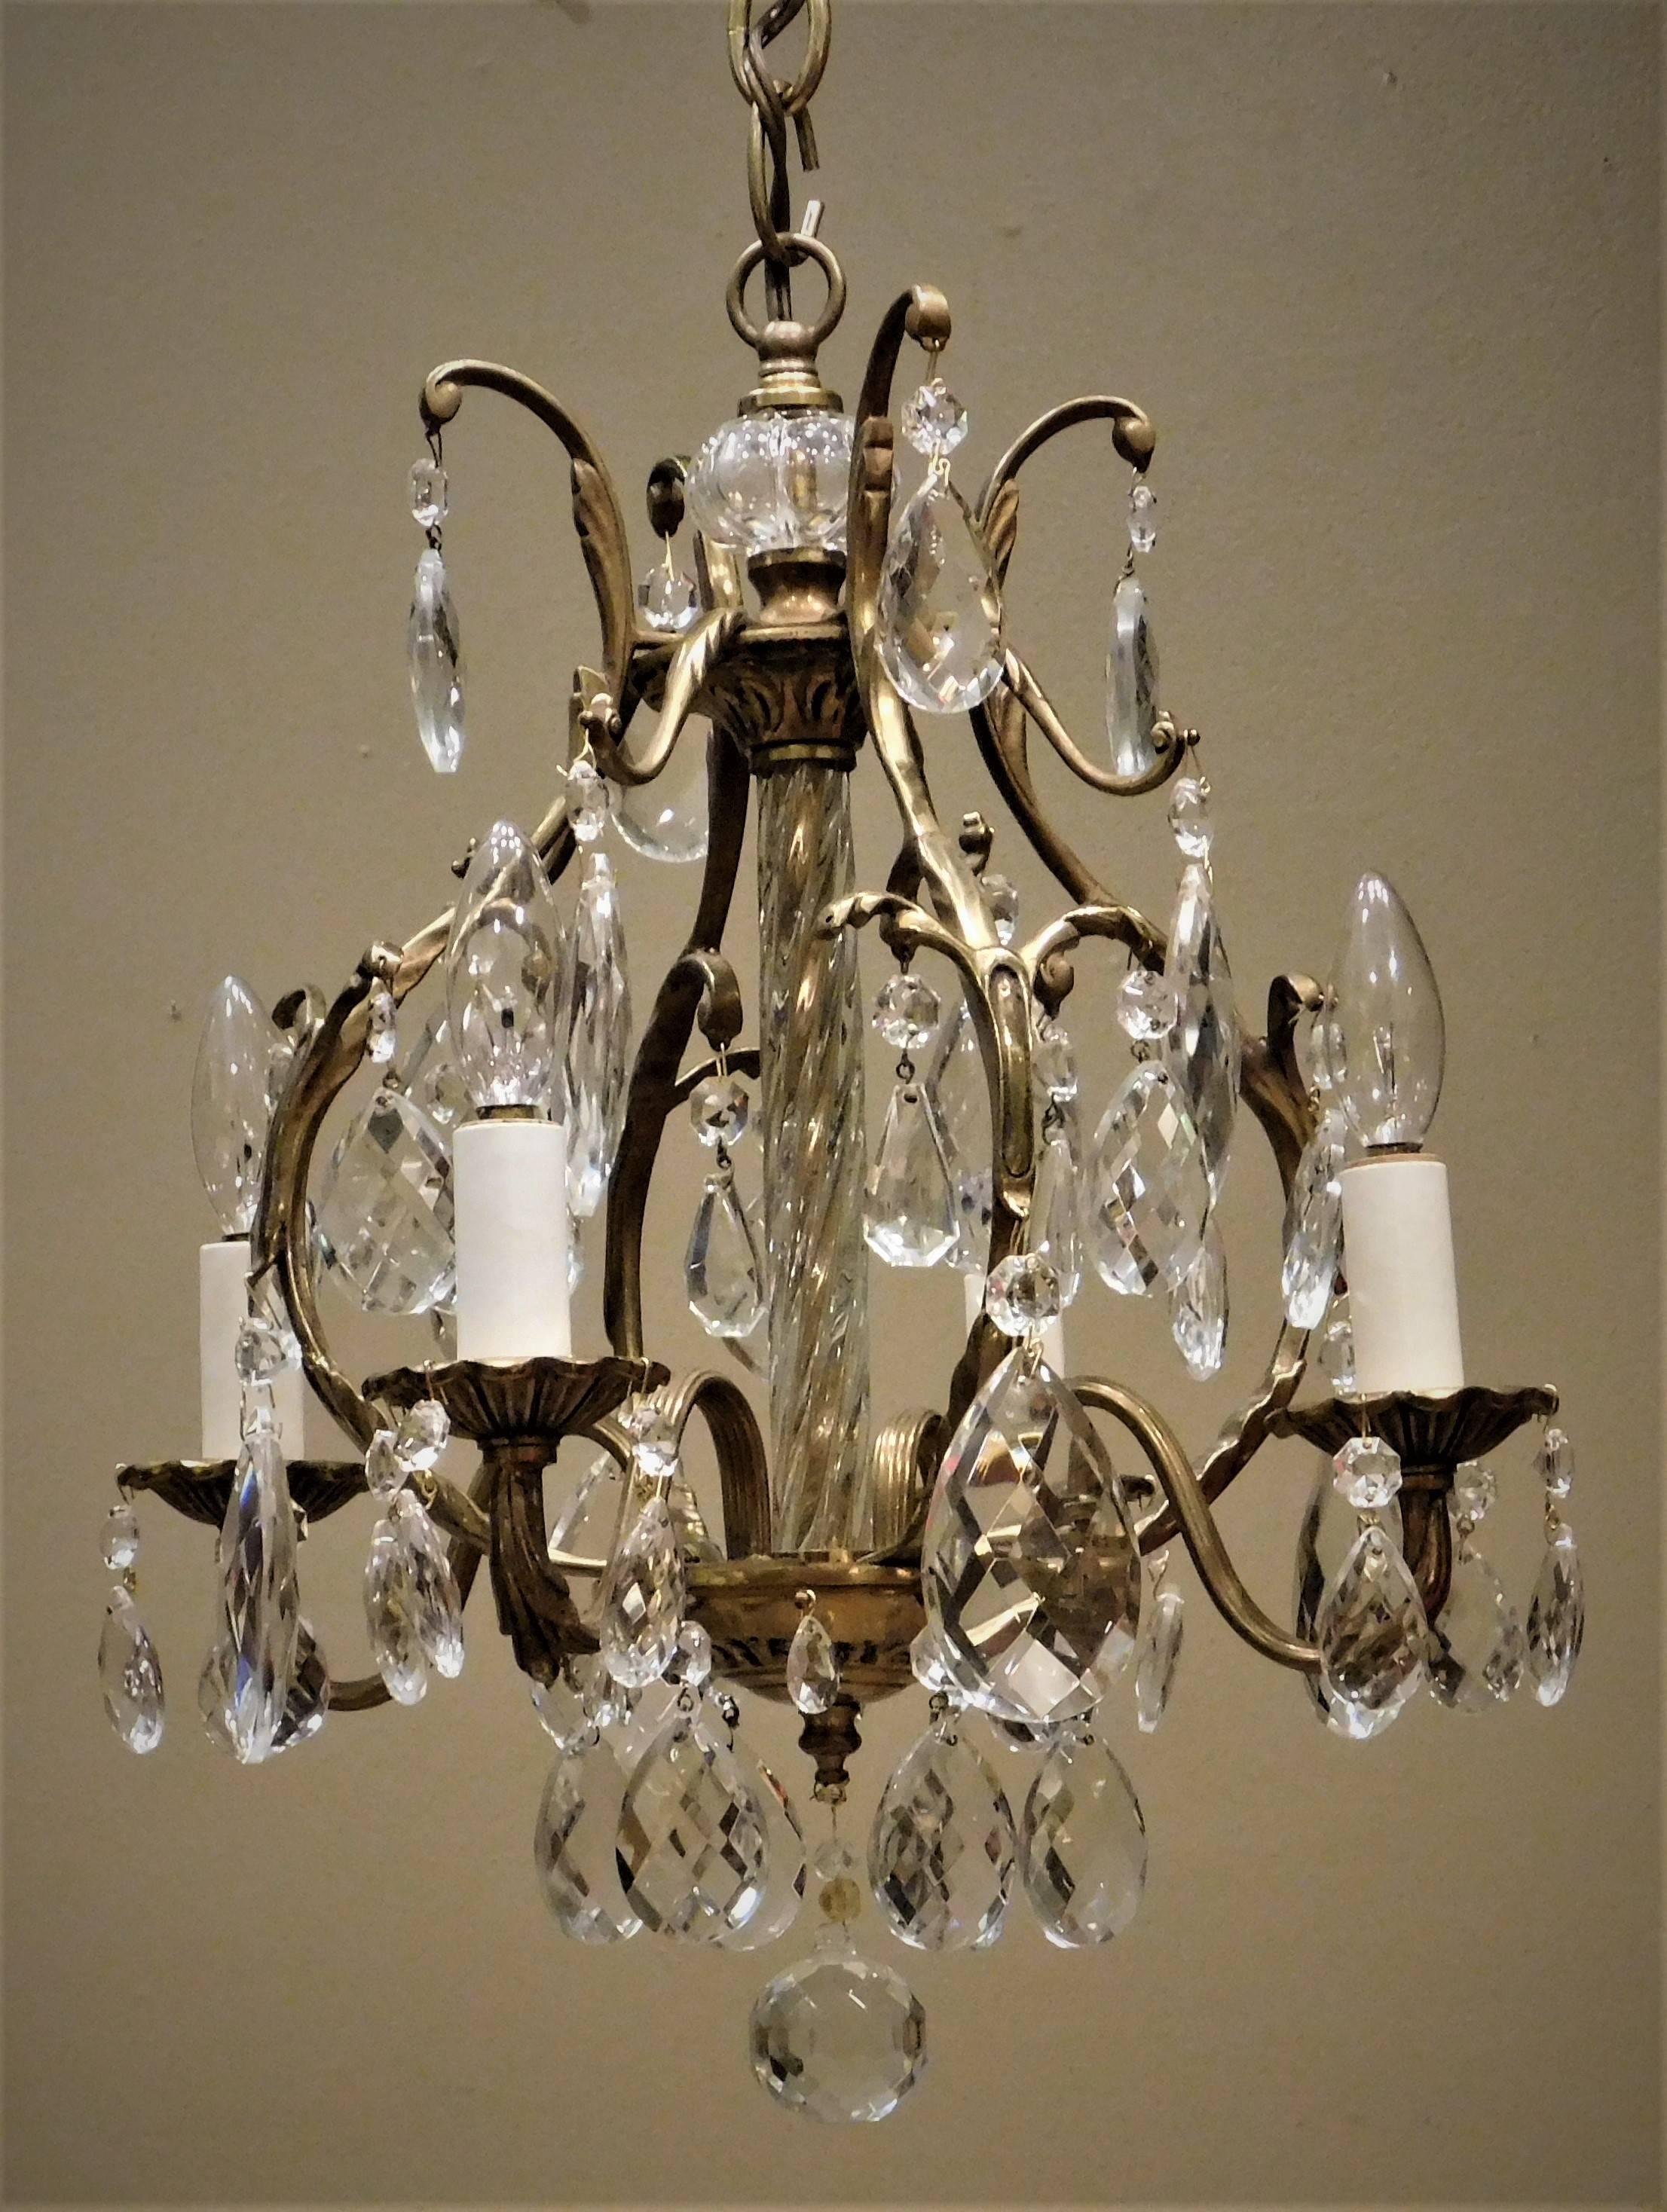 Small chandelier. Hand-cast brass with handblown glass and Swedish hand-cut crystal. Diminutive size makes this chandelier perfect for powder rooms and dressing rooms. Ceiling cap, hanging hardware, and 1' of chain included.